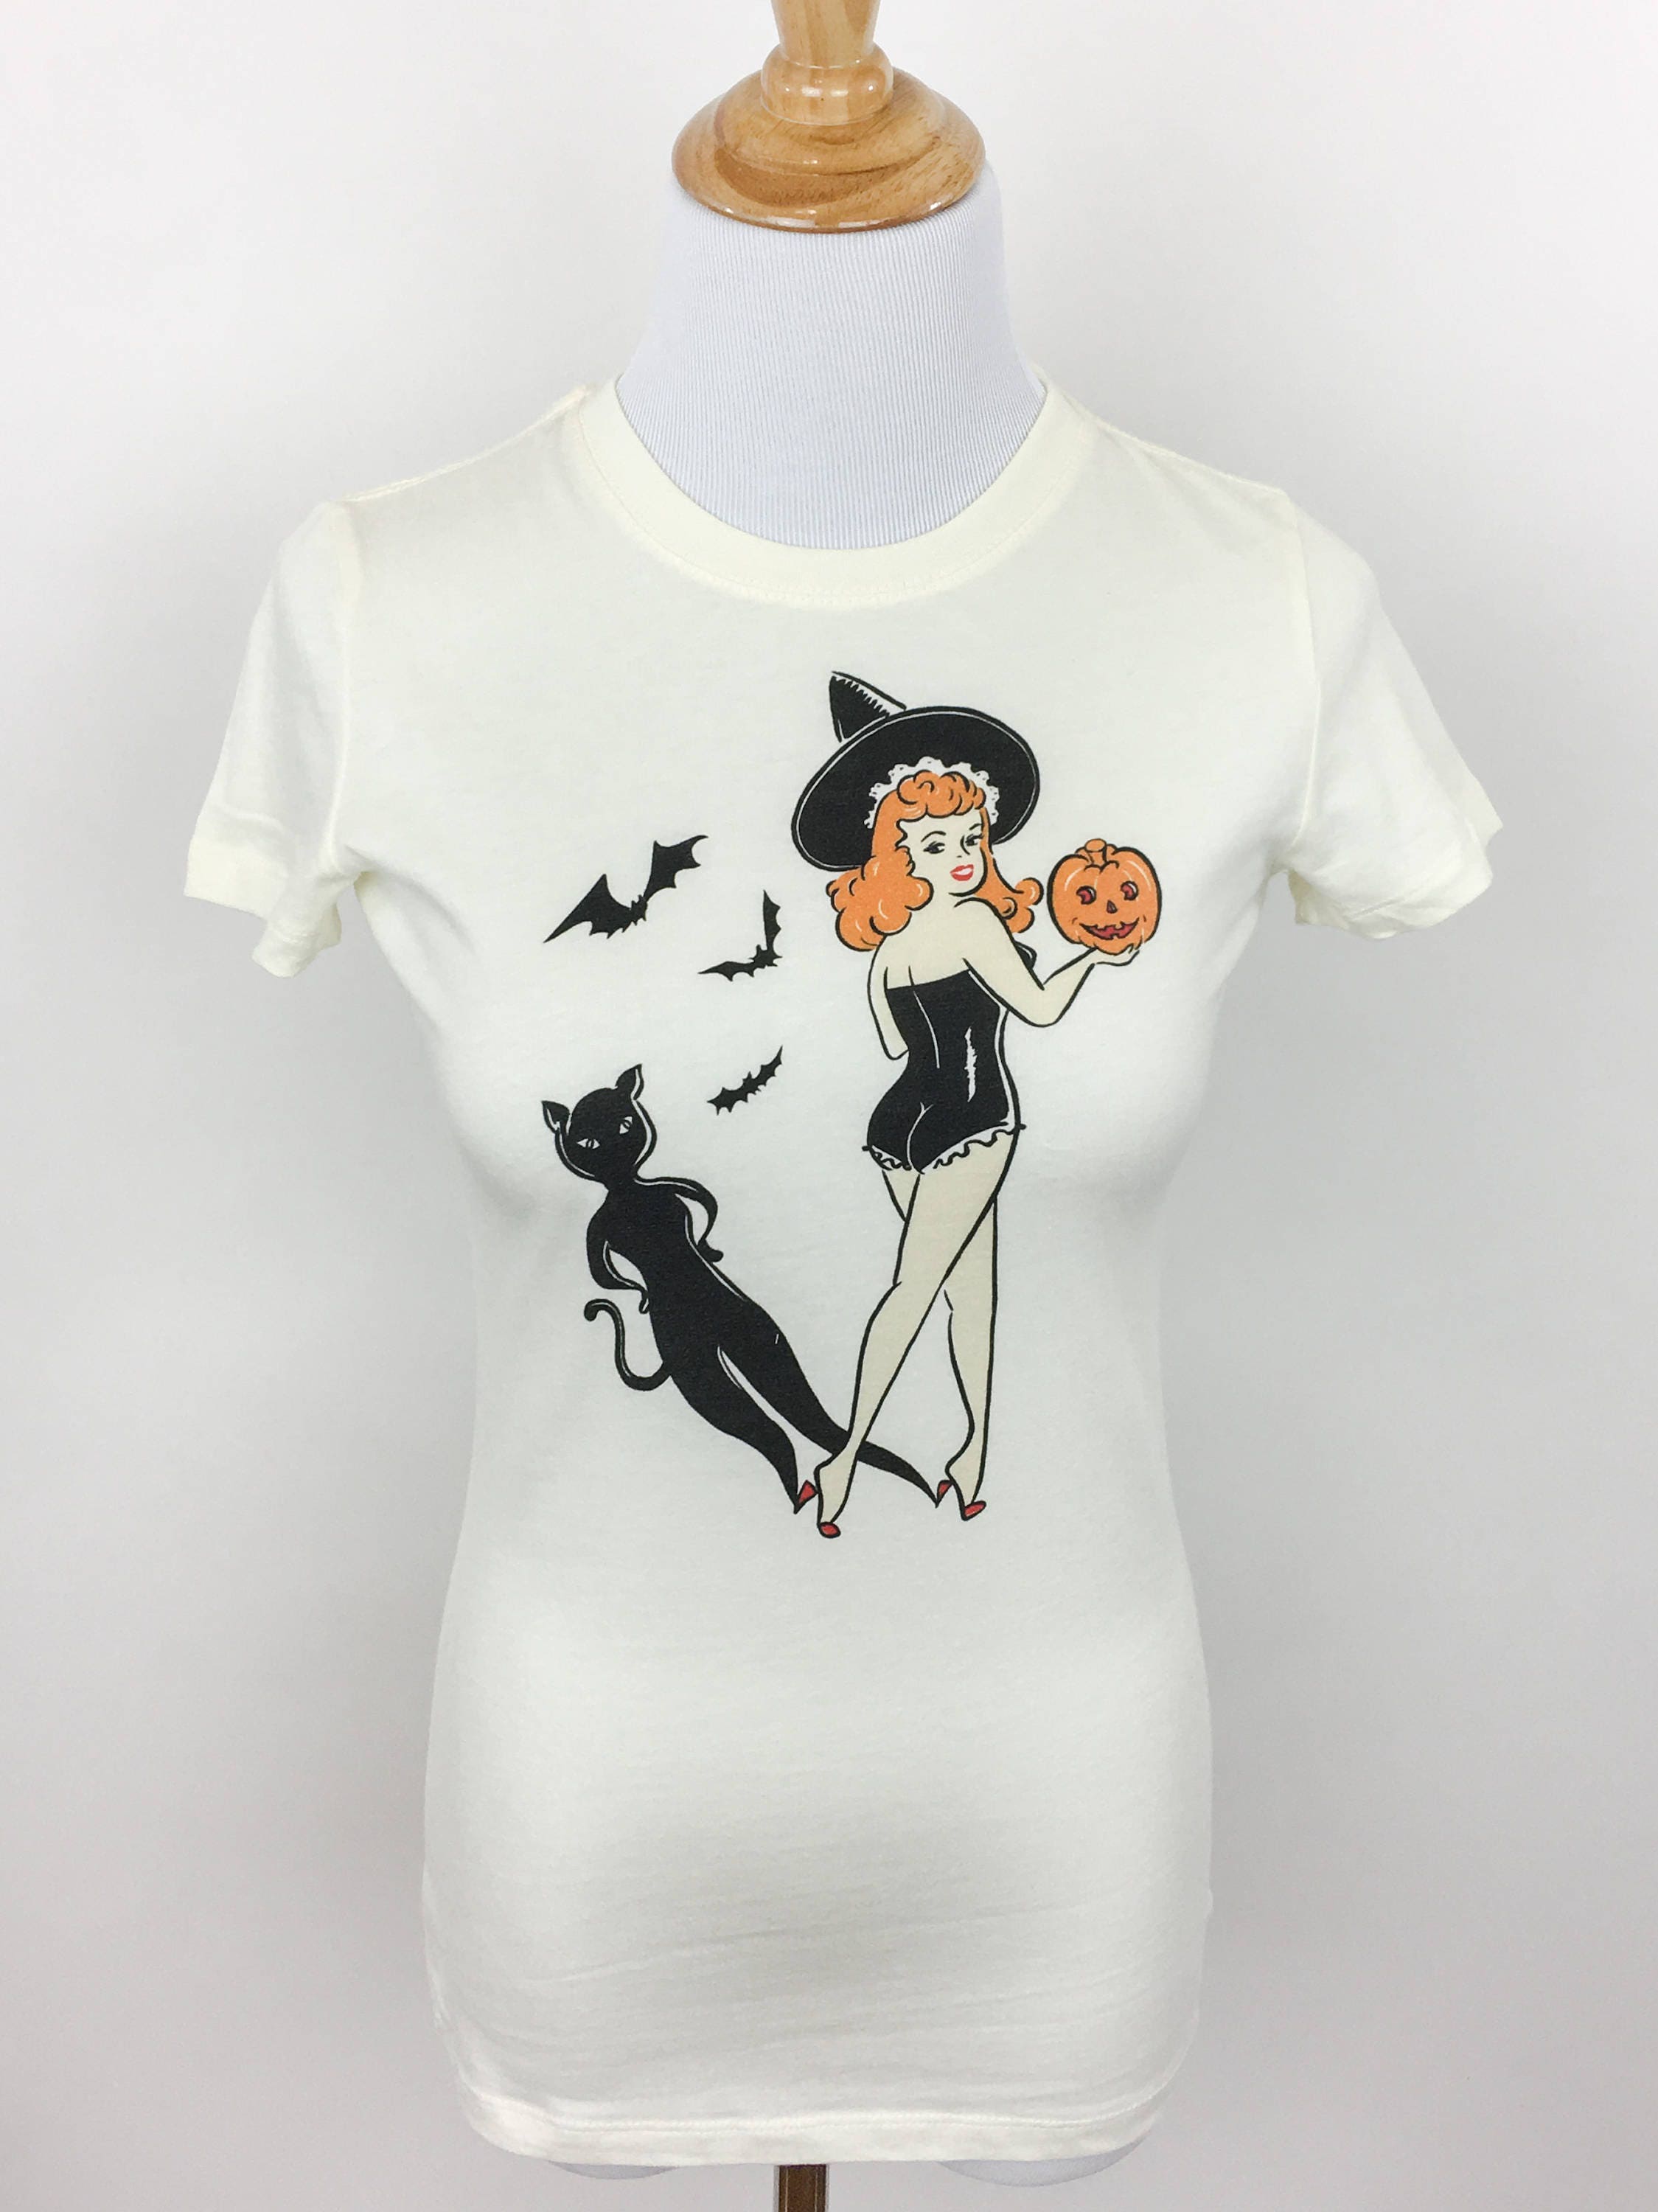 Trick or Treat Fitted Tshirt in Cream size S,M,L,XL,2XL Halloween vintage inspired by Mischief Made Kleding Dameskleding Tops & T-shirts T-shirts 